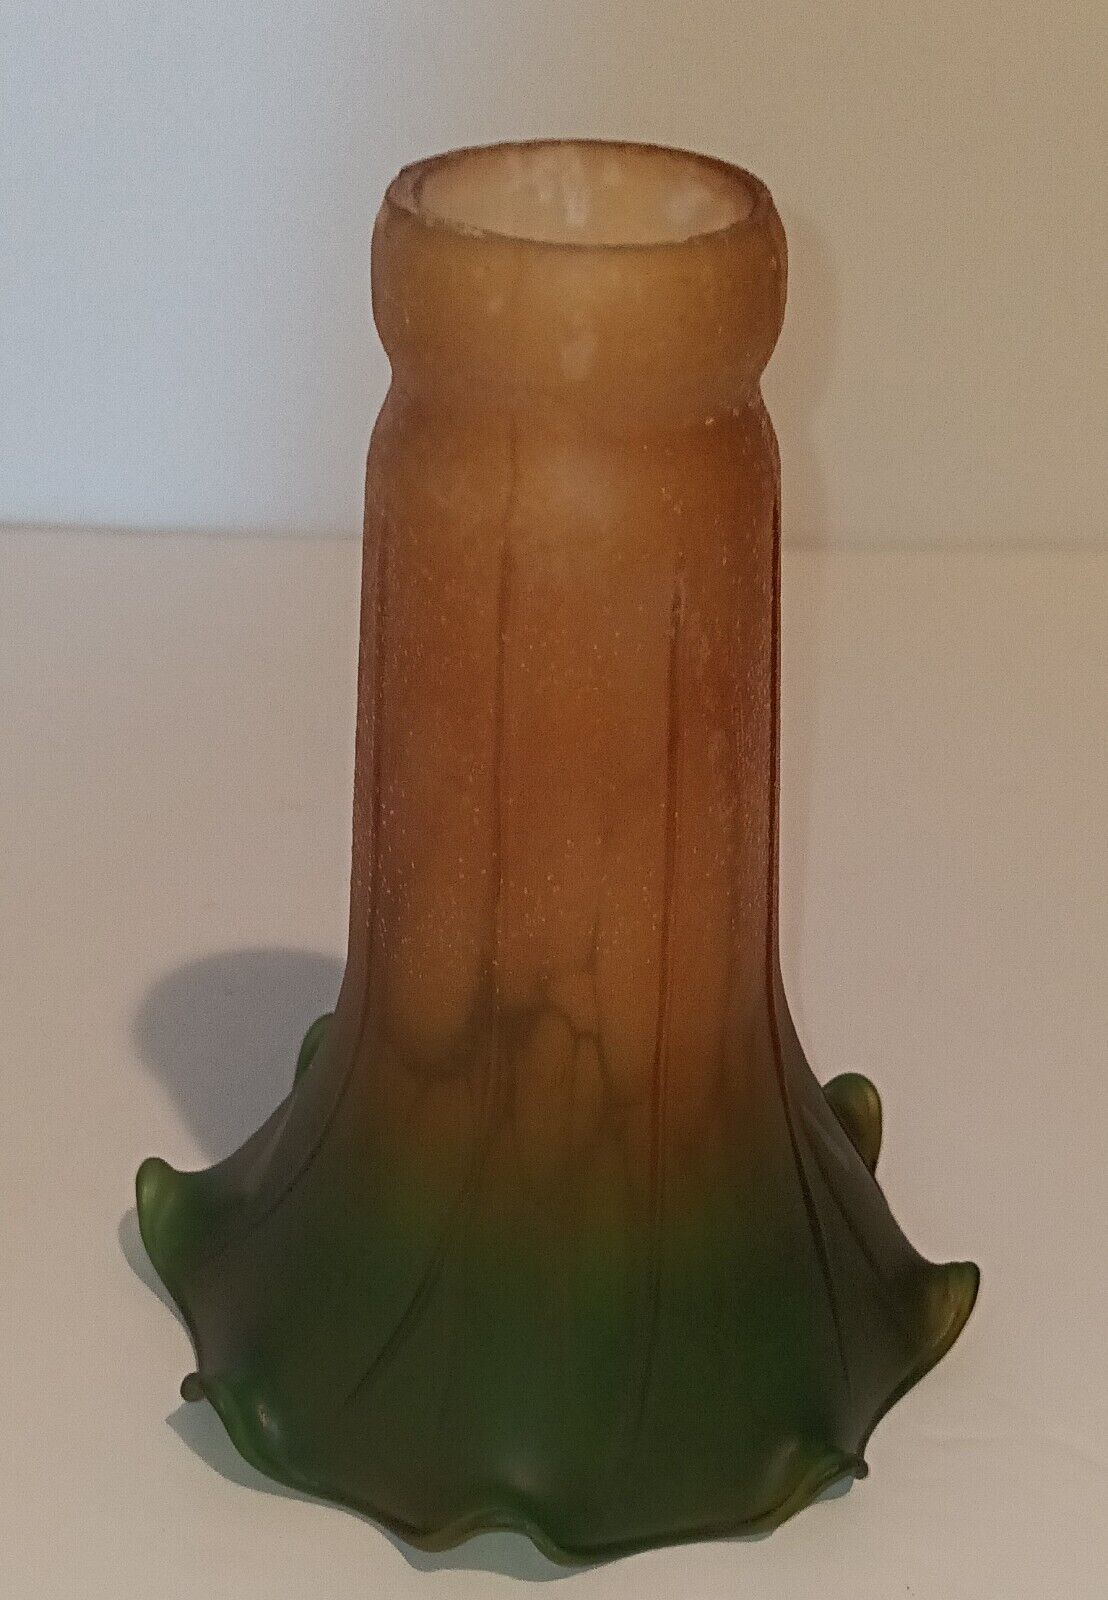 One Vintage Trumpet Green Amber Yellow Lily Satin Glass Lamp Shade. Still in Box